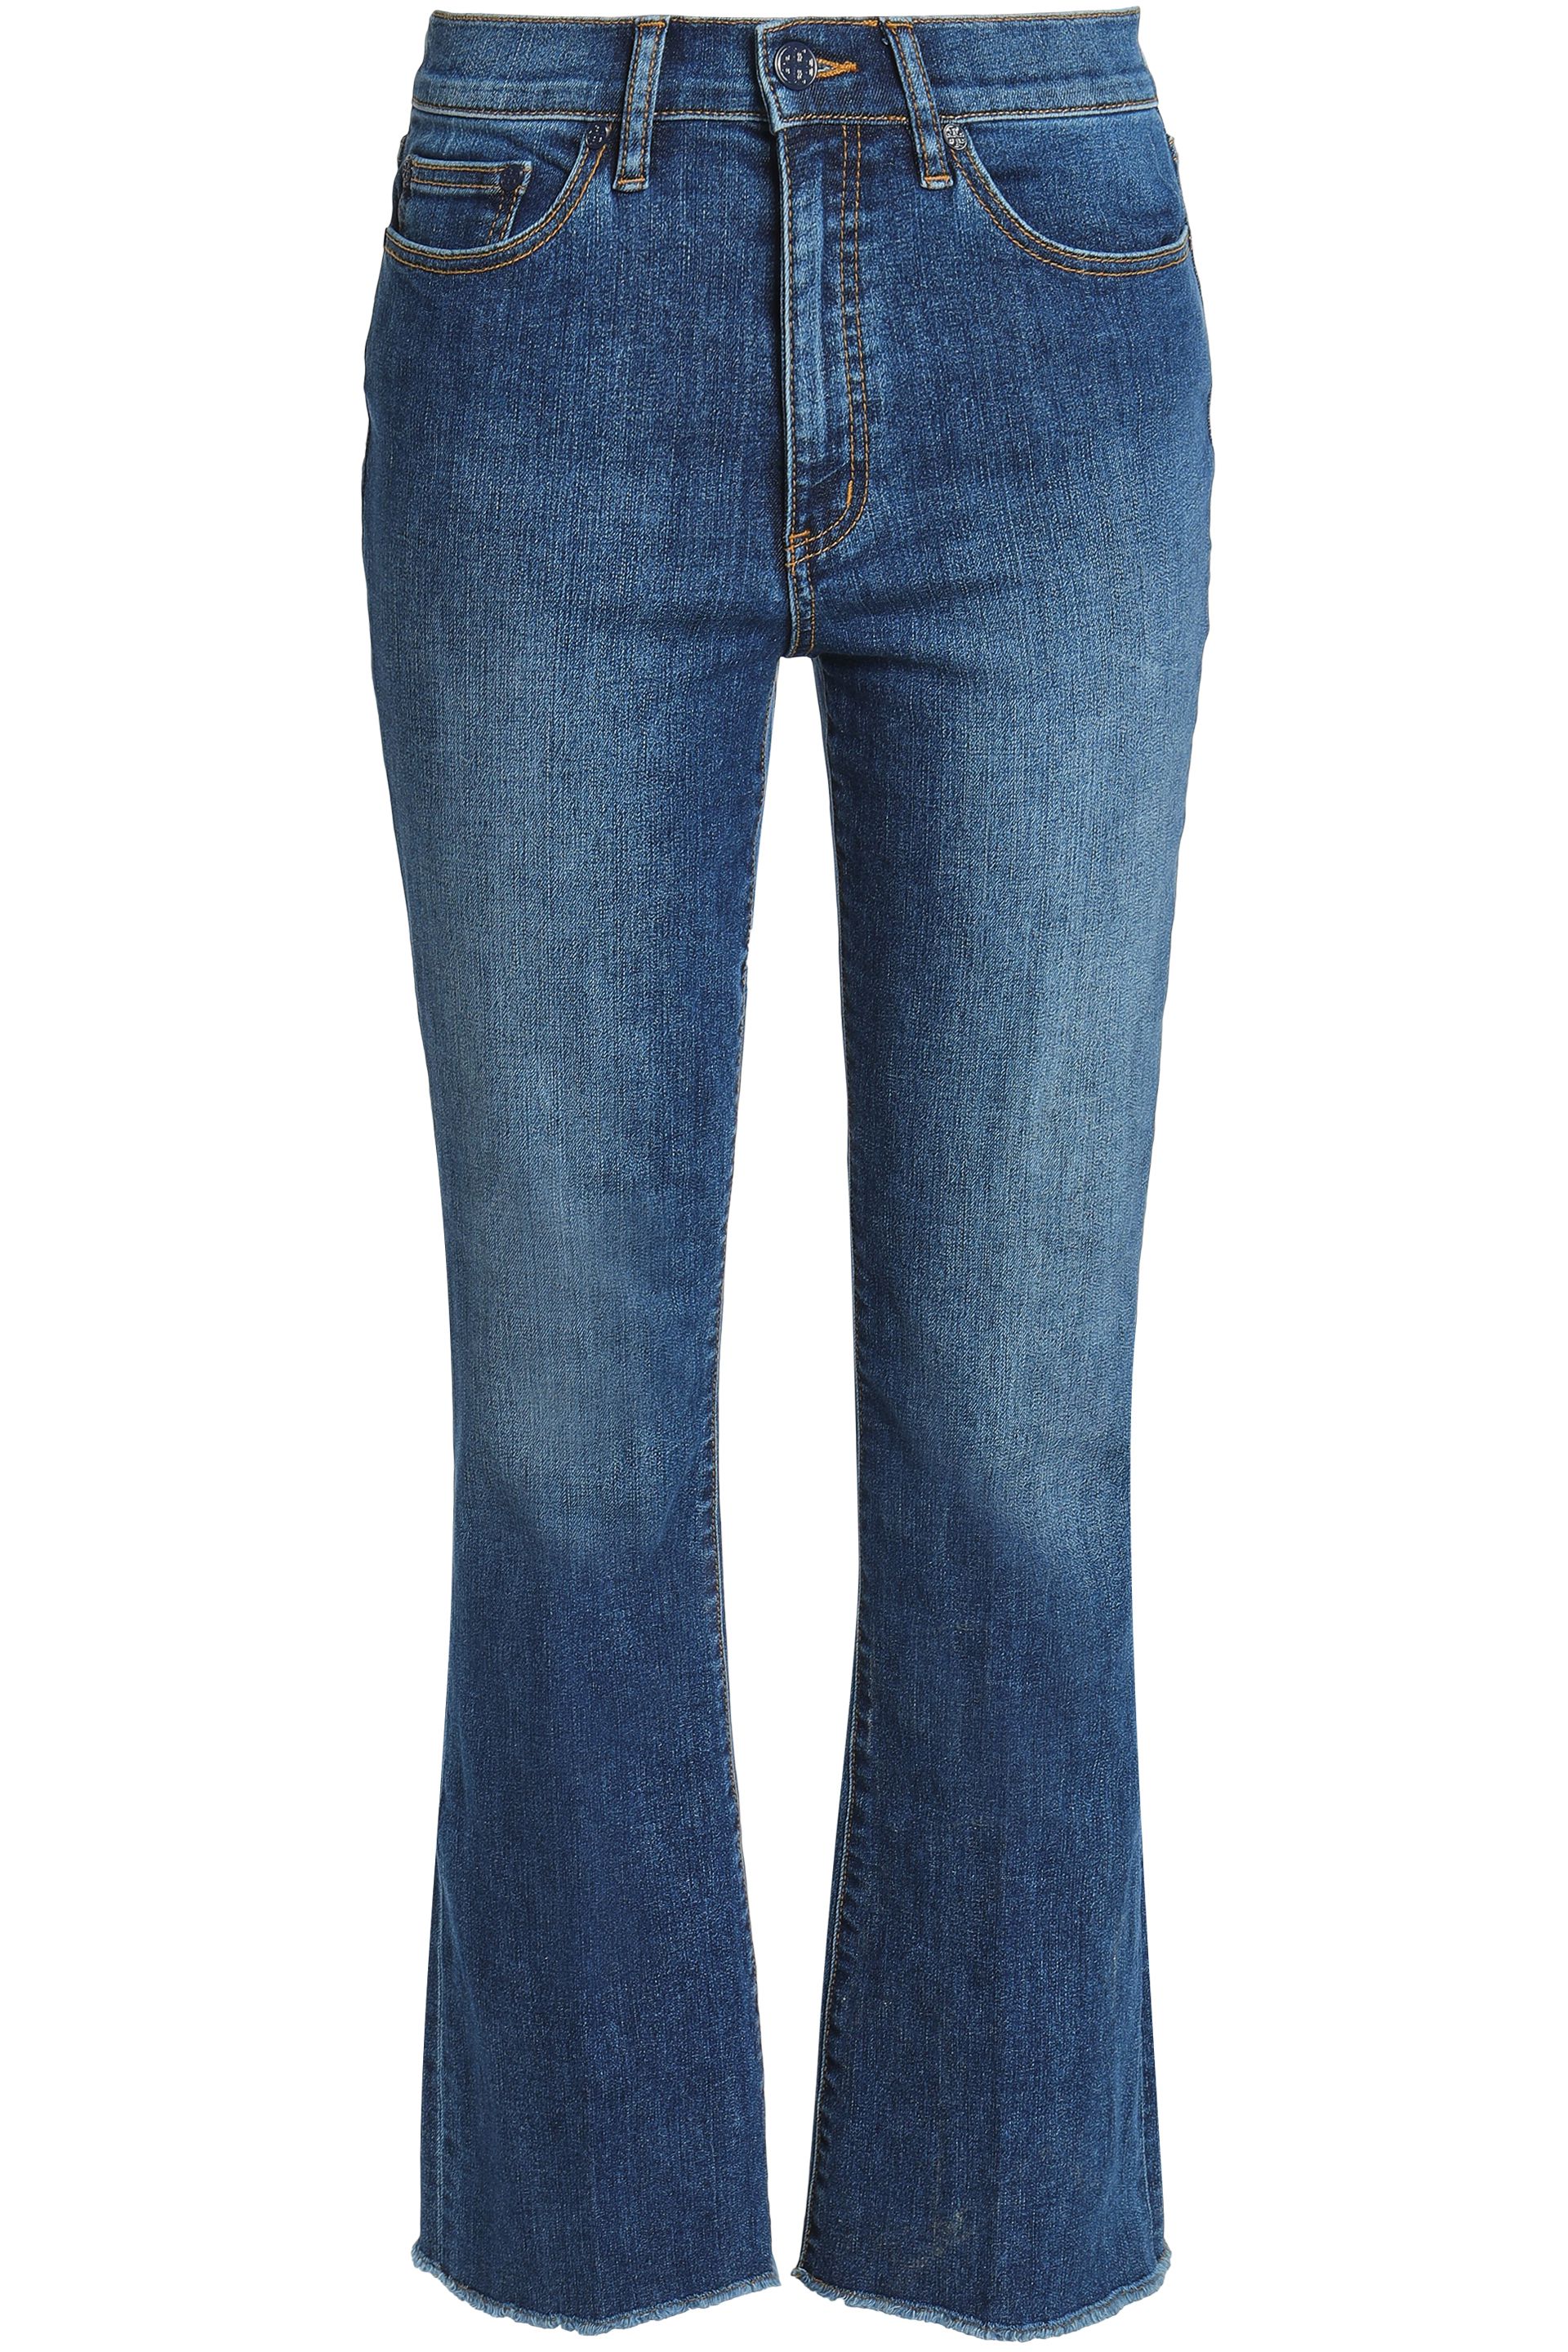 Women's Bootcut Jeans | Sale Up To 70% Off At THE OUTNET